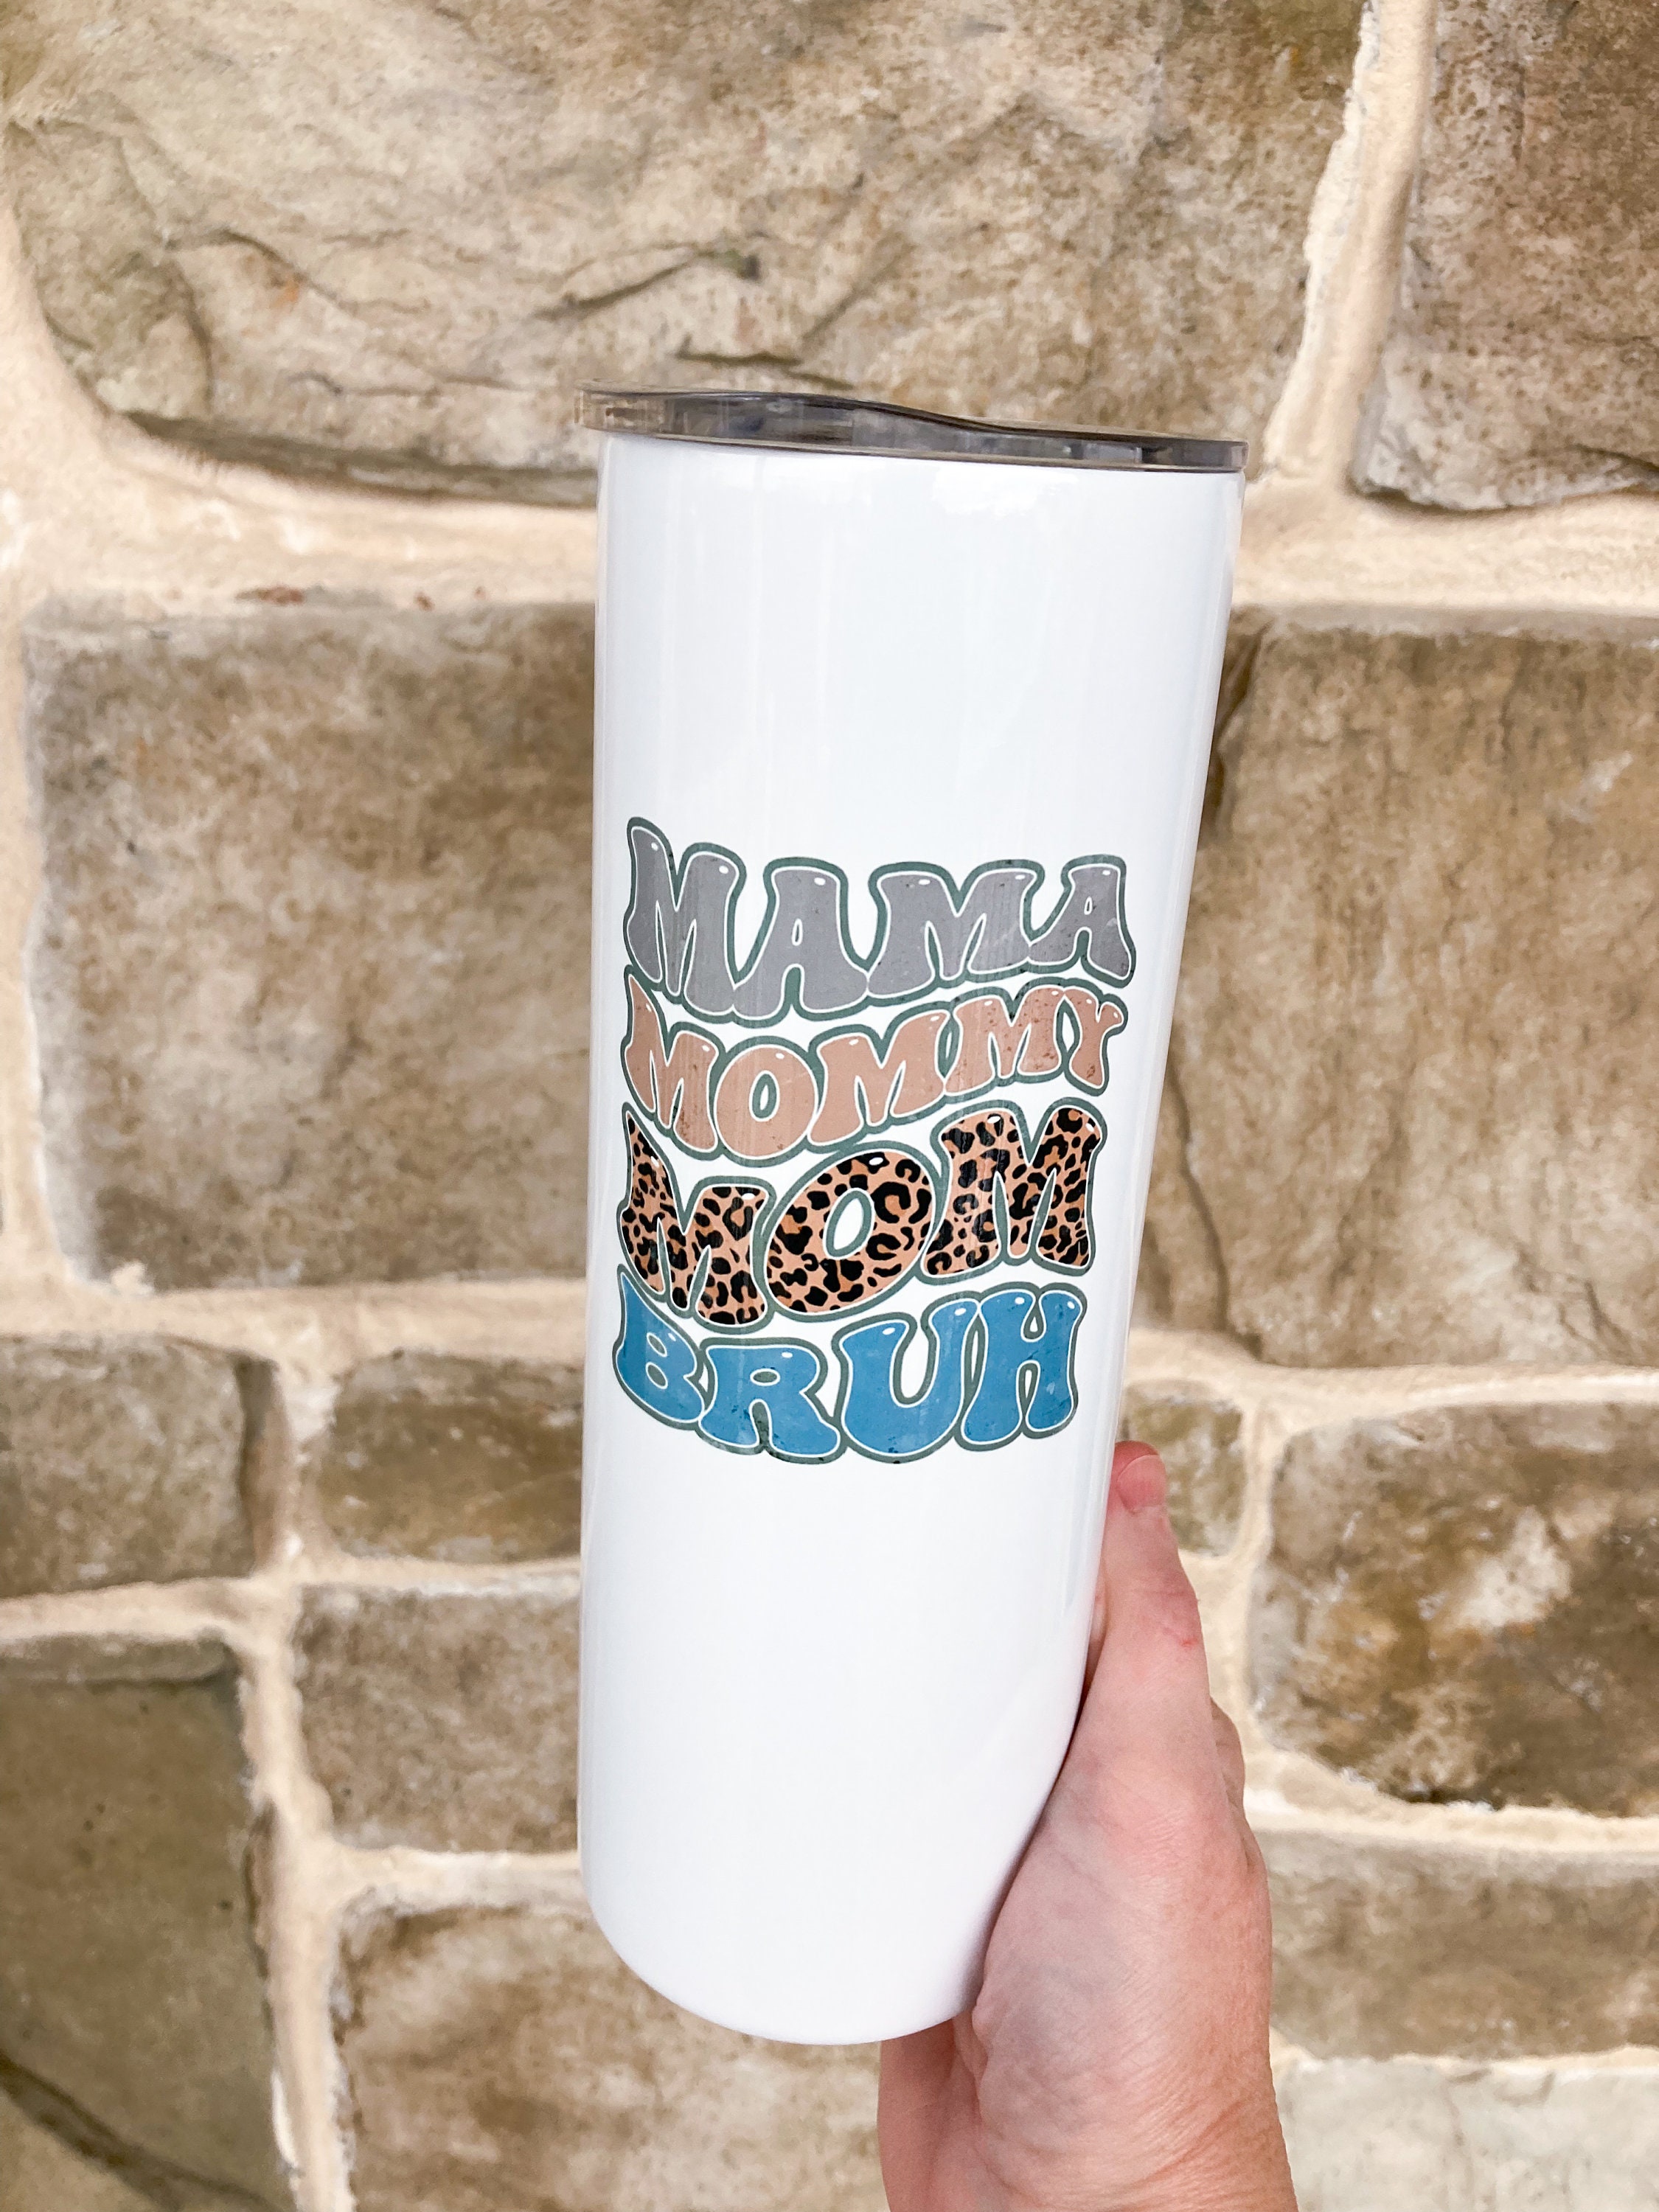 Retro Mama Mommy Mom Bruh 40oz Shimmer Tumbler with Handle – Hippo